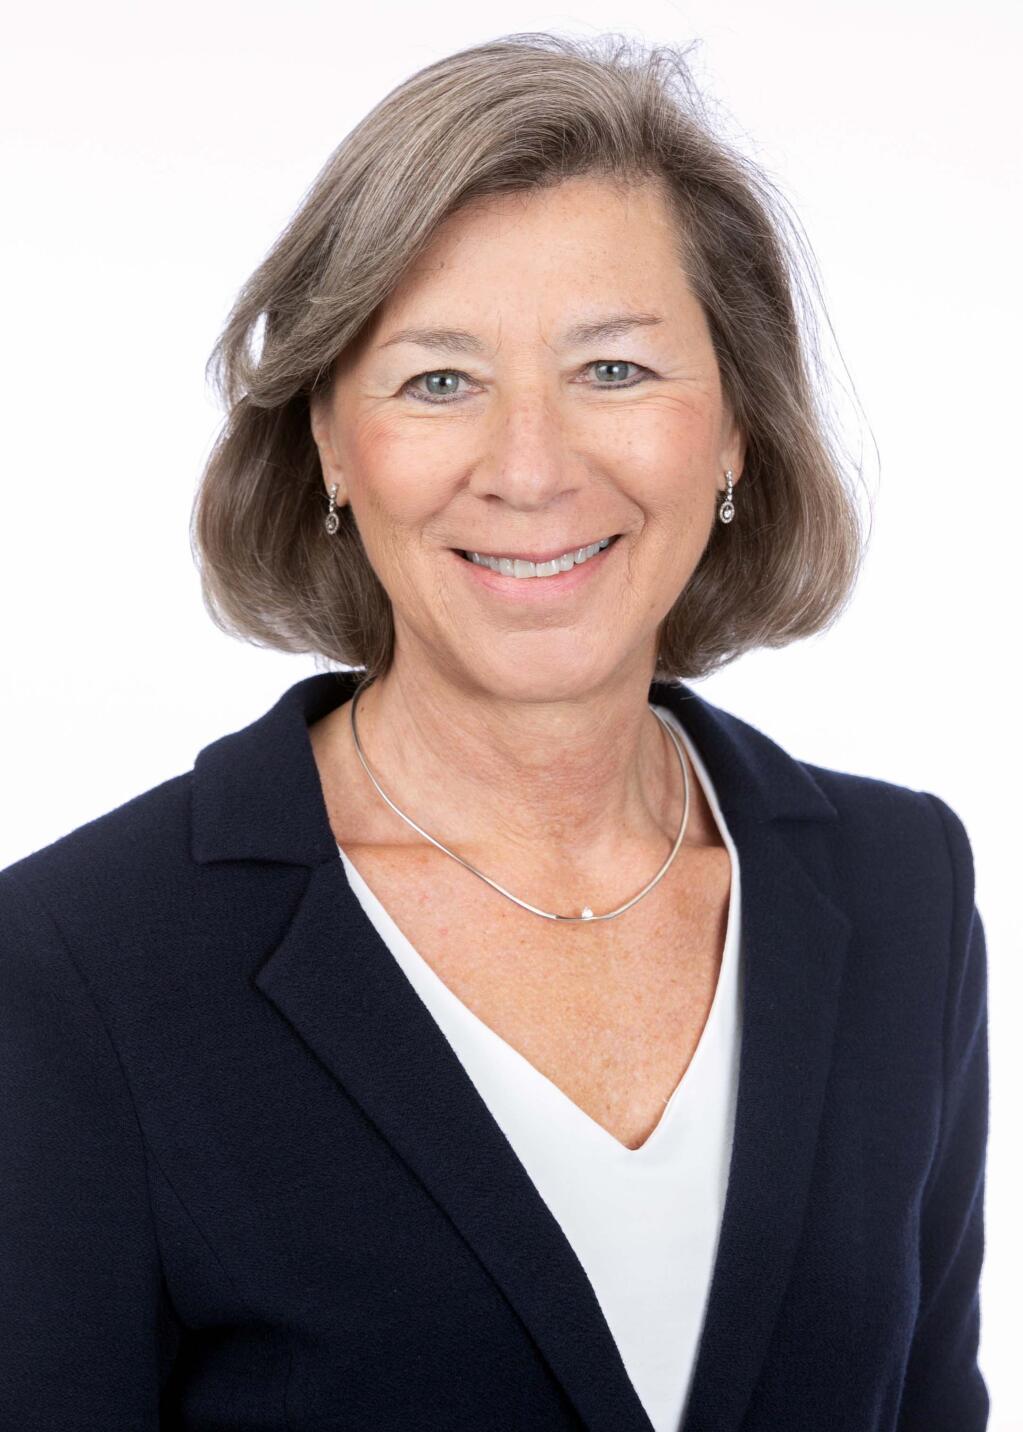 Mary Leonard Wilson has over 20 years of community banking and executive experience at independent community banks in the San Francisco Bay Area. (courtesy photo)